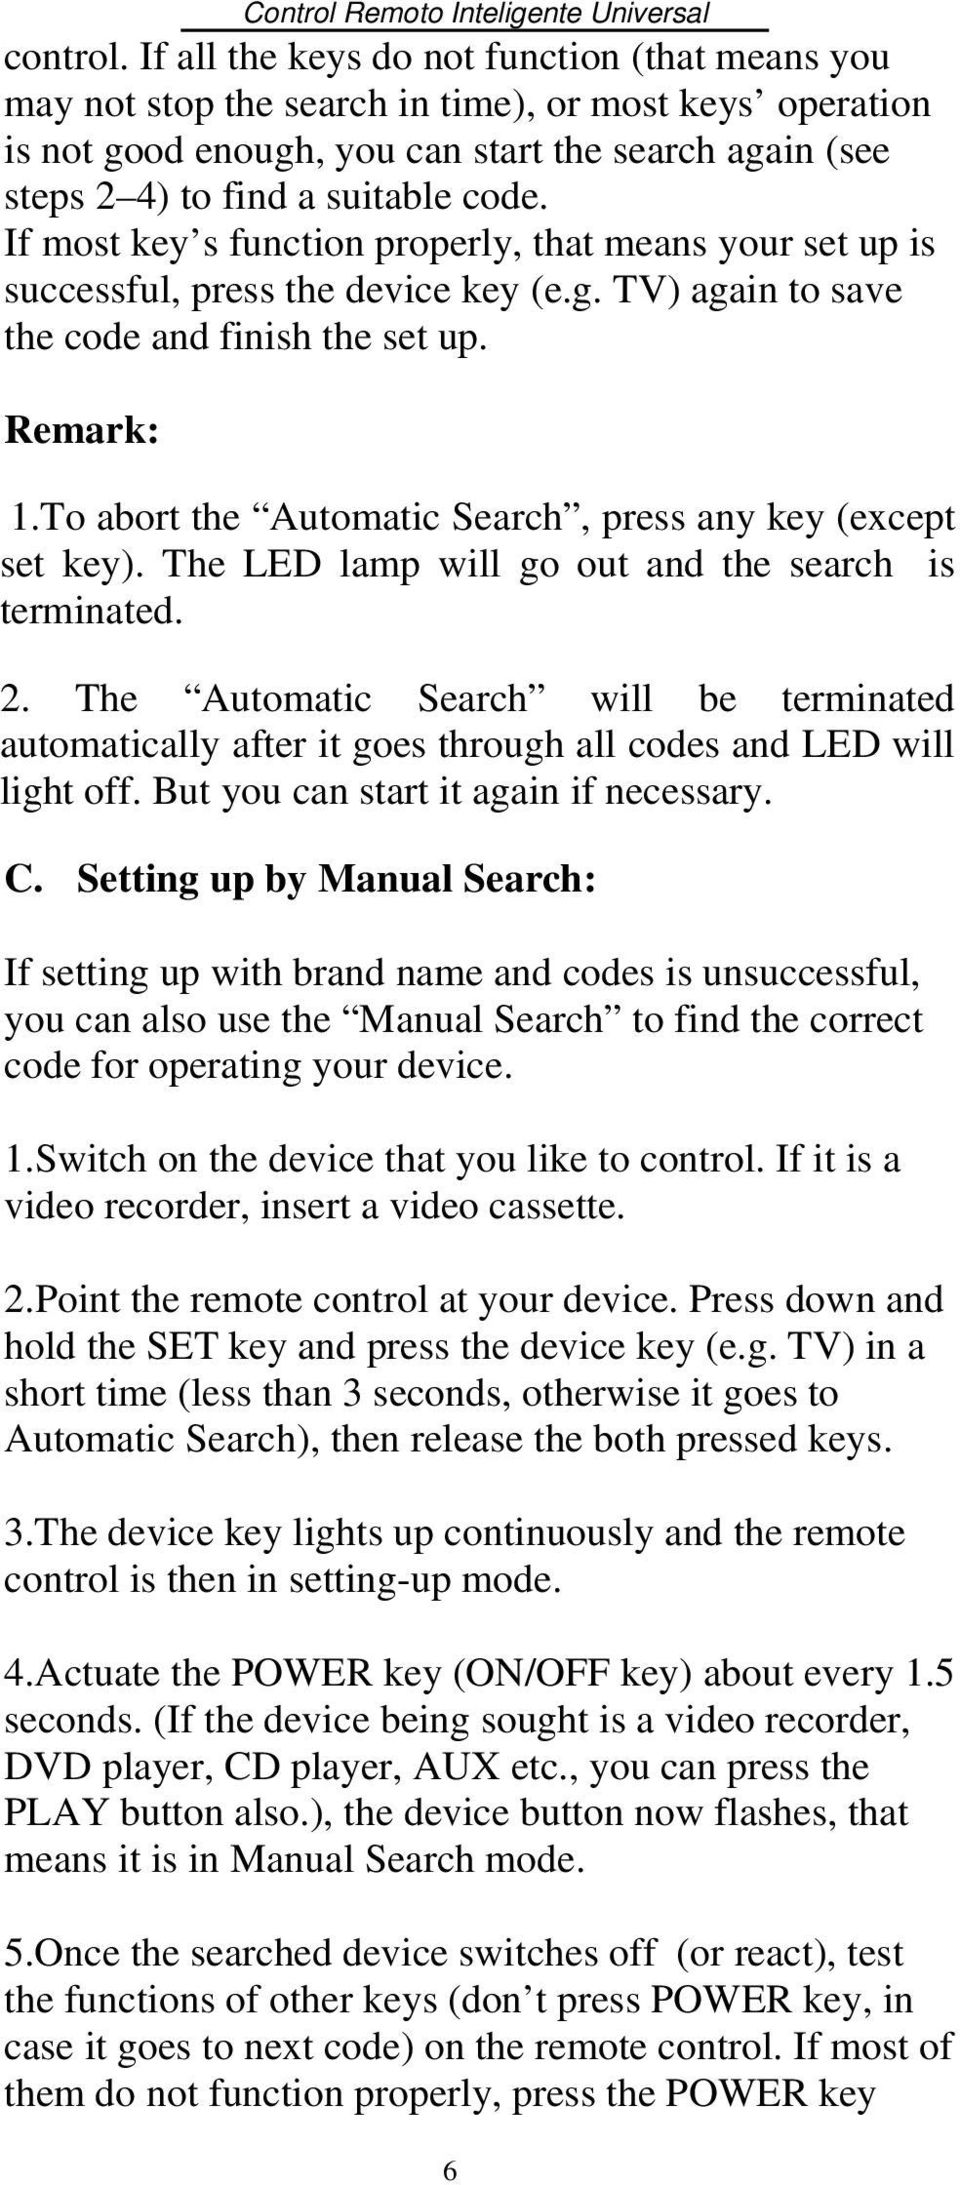 If most key s function properly, that means your set up is successful, press the device key (e.g. TV) again to save the code and finish the set up. Remark: 1.